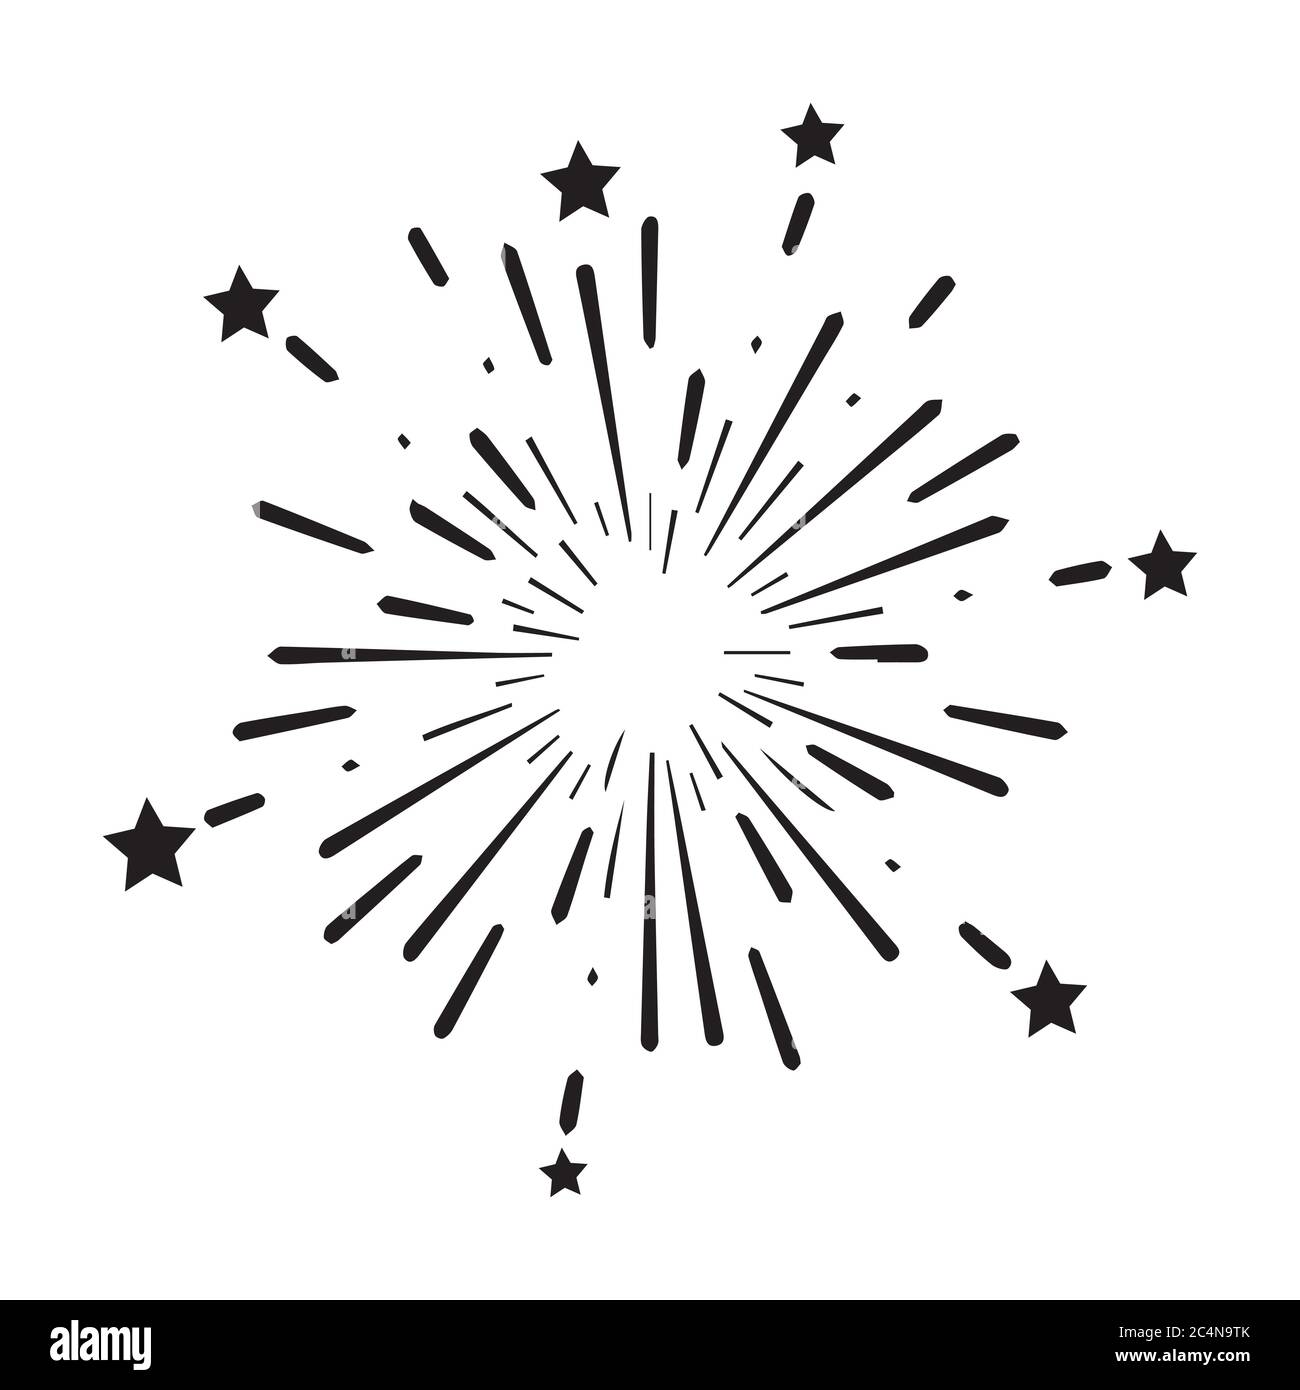 Fireworks Explosion Boom Bomb with Stars Design. Black Icon Illustration Isolated on a White Background. EPS Vector Stock Vector